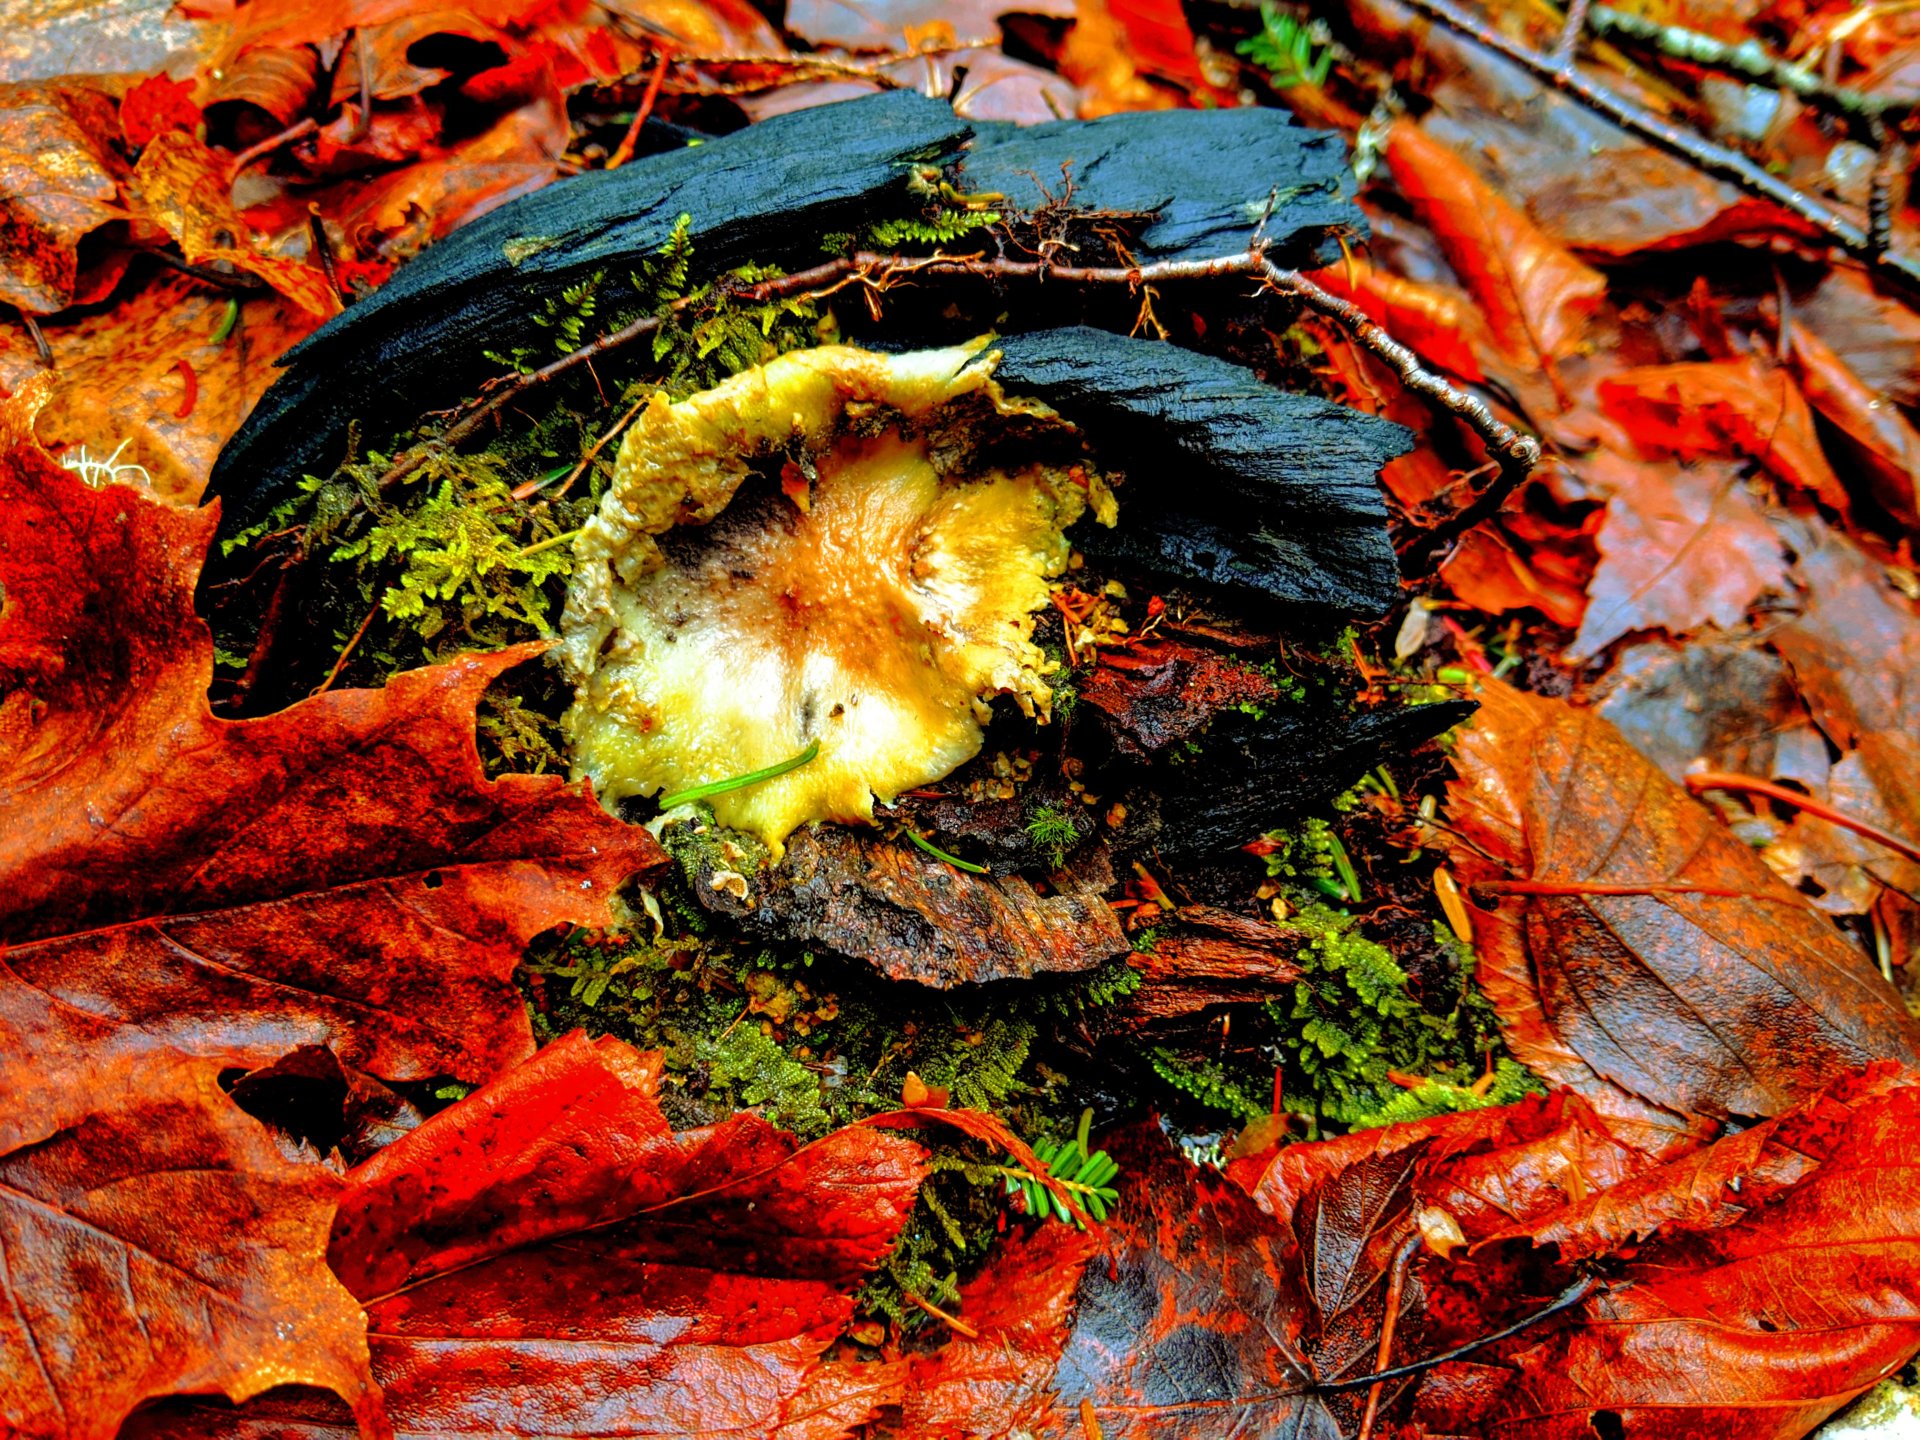 flat, wet, yellow mushroom surrounded by red leaves in downeast, Maine.